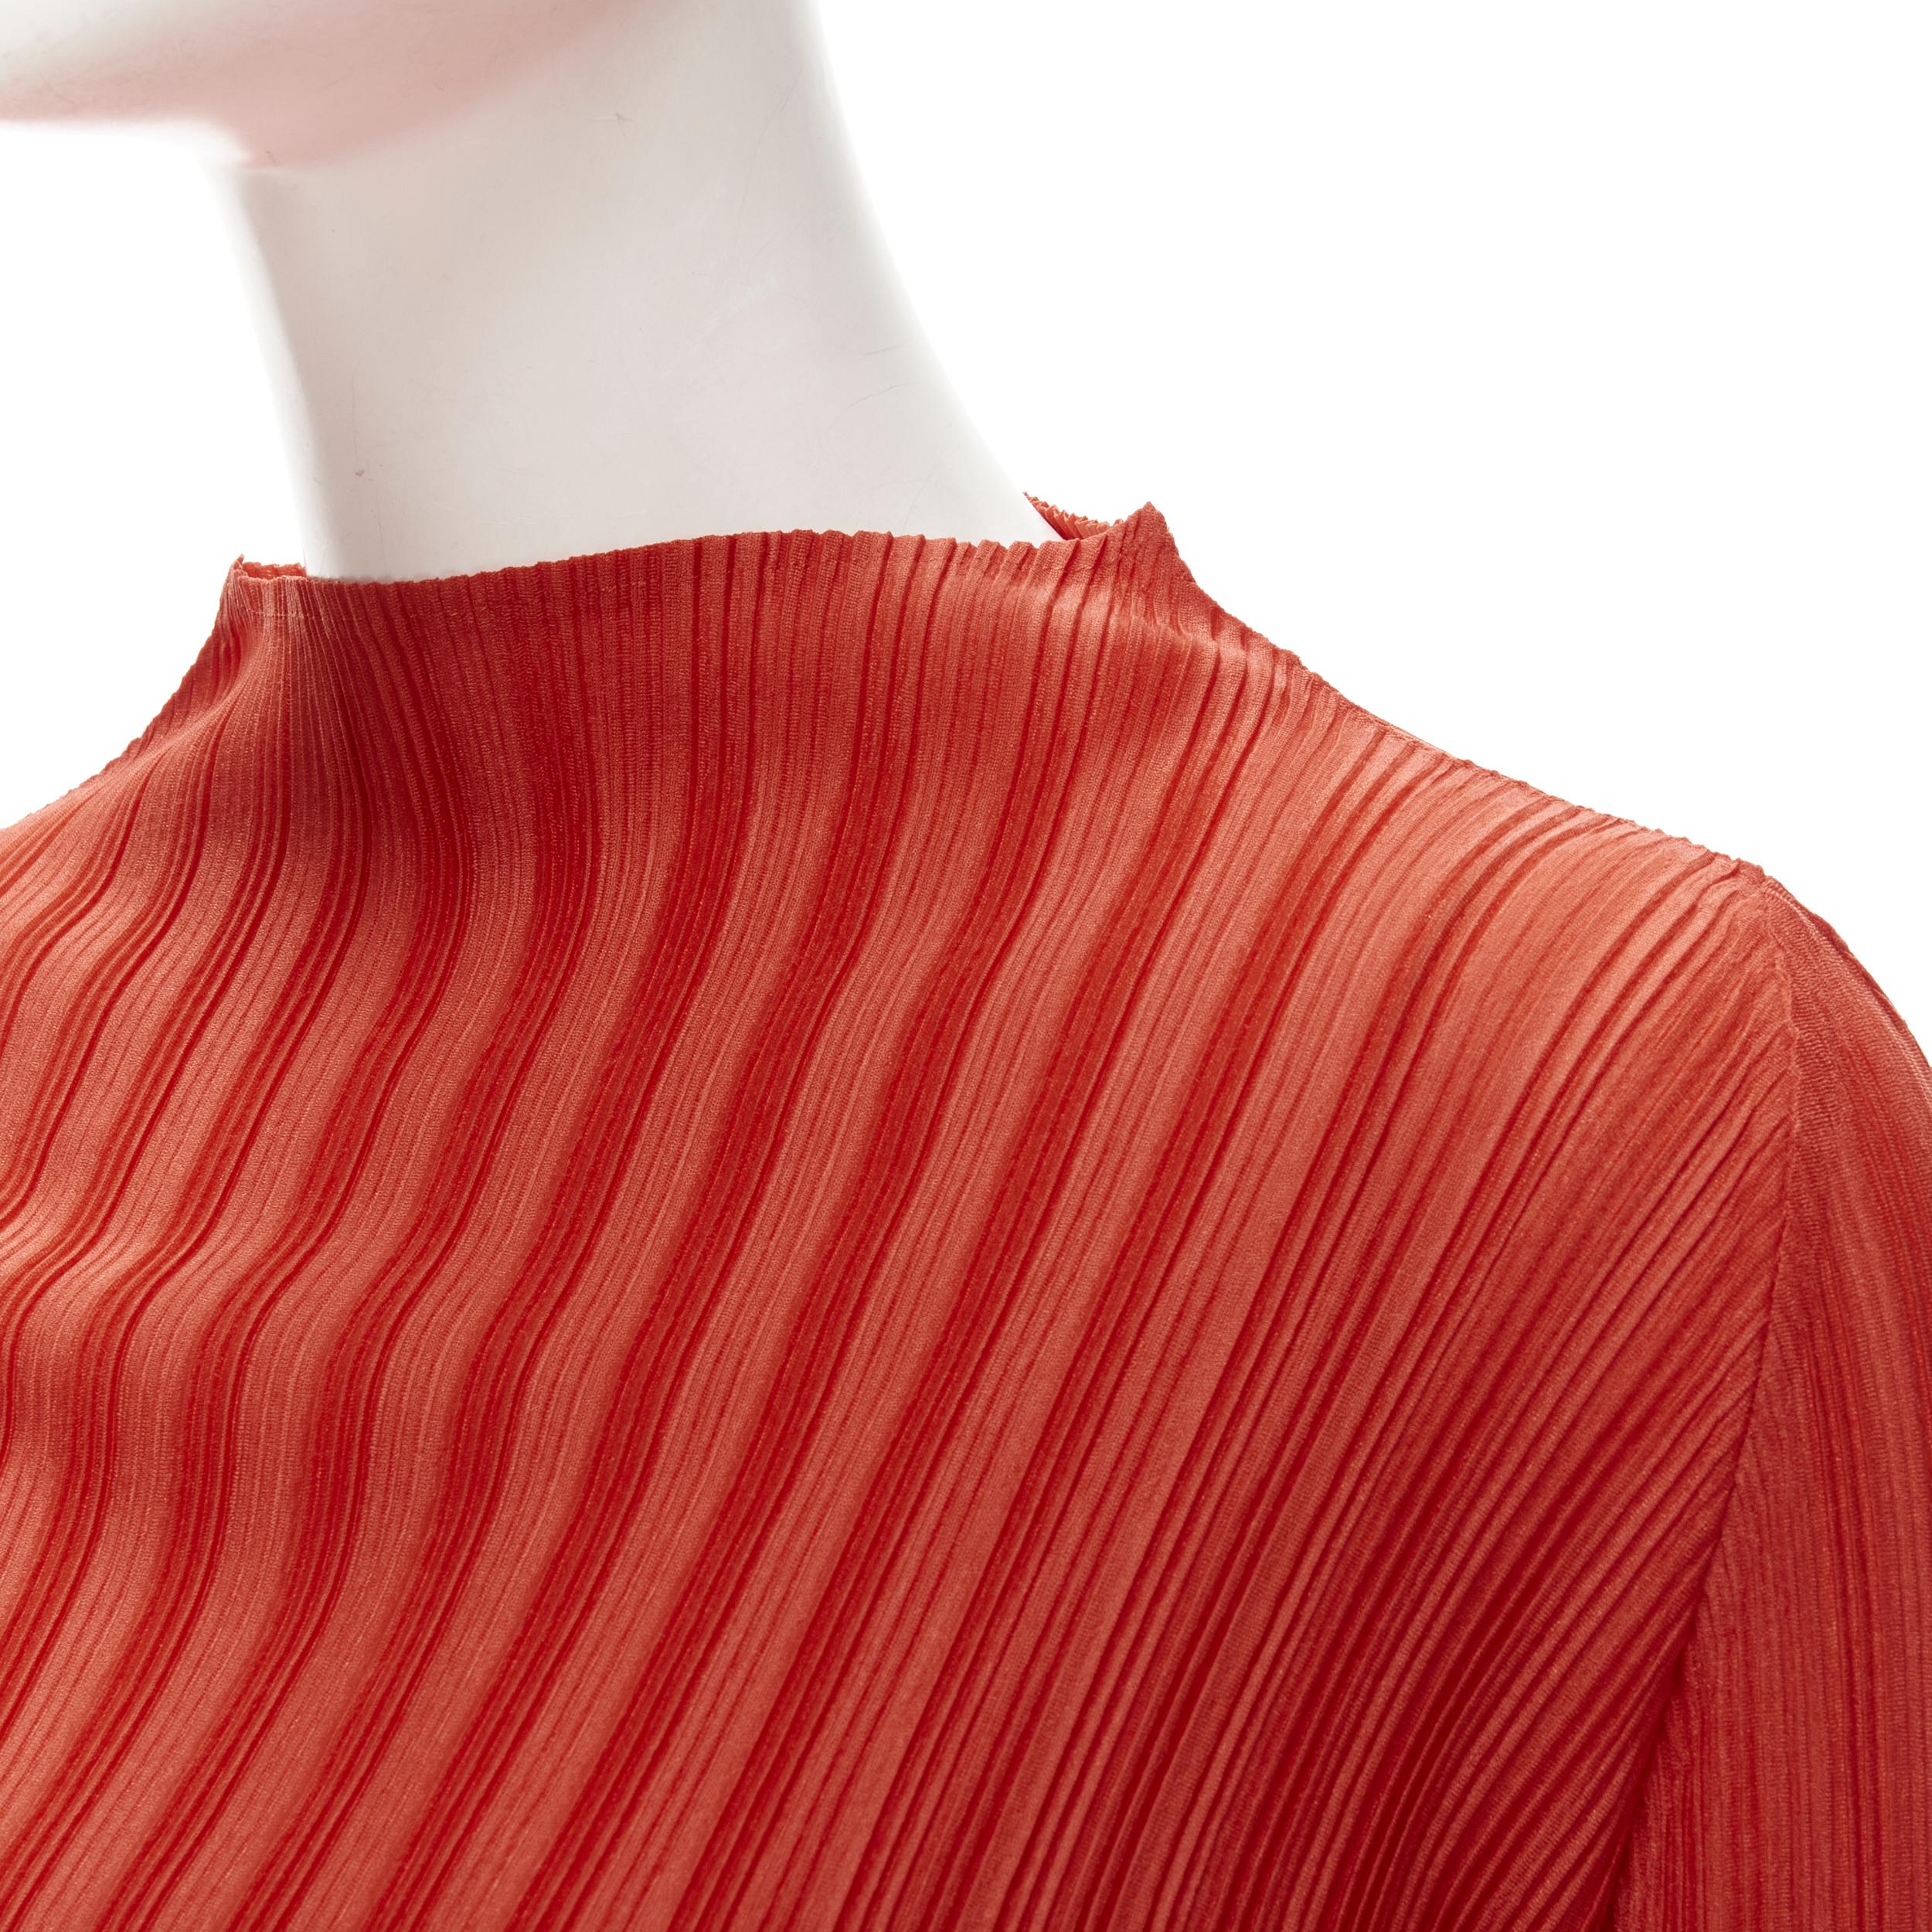 PLEATS PLEASE ISSEY MIYAKE burnt orange pleated plisse mock collar top JP3 L
Brand: Pleats Please Issey Miyake
Material: Polyester
Color: Tangerine Orange
Pattern: Solid
Made in: Japan

CONDITION:
Condition: Excellent, this item was pre-owned and is